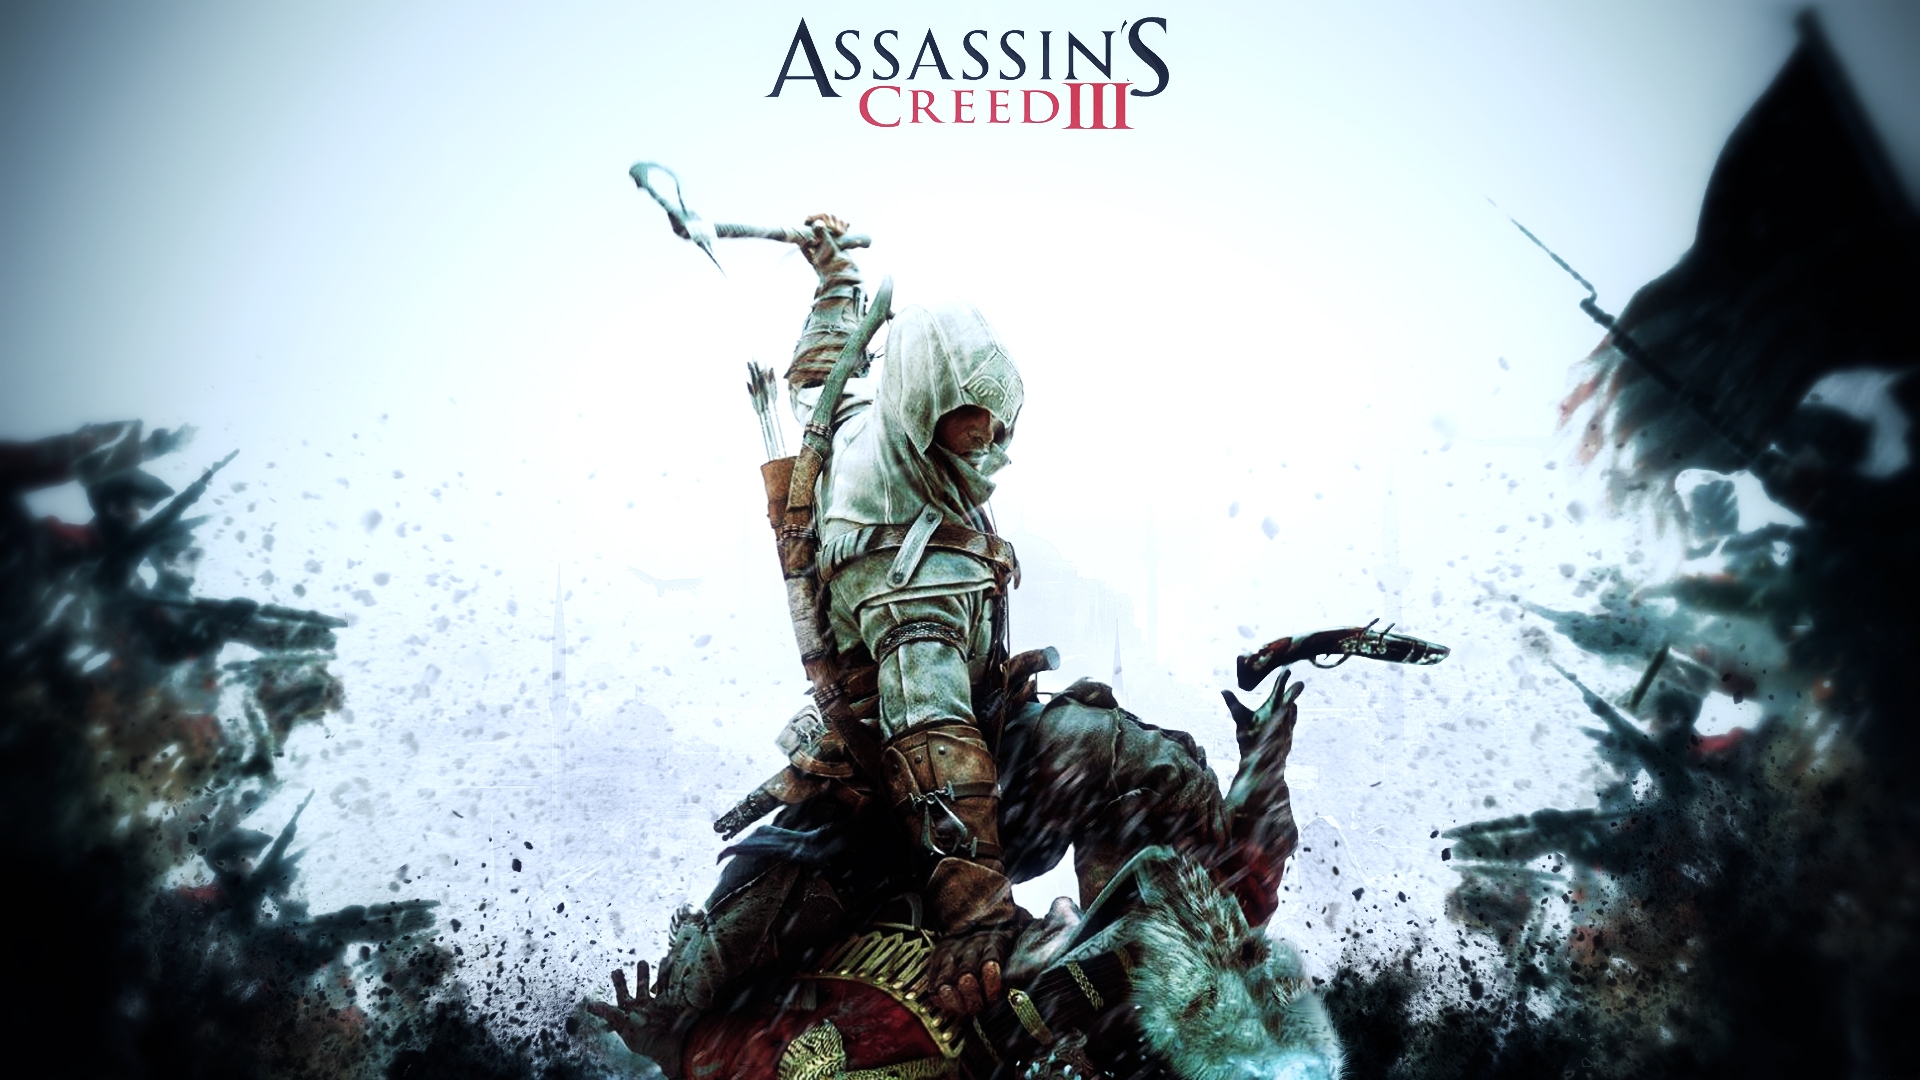 Wallpaper Assassins Creed 3 Remastered Assassins Creed III Ubisoft Xbox  One pc Game Background  Download Free Image